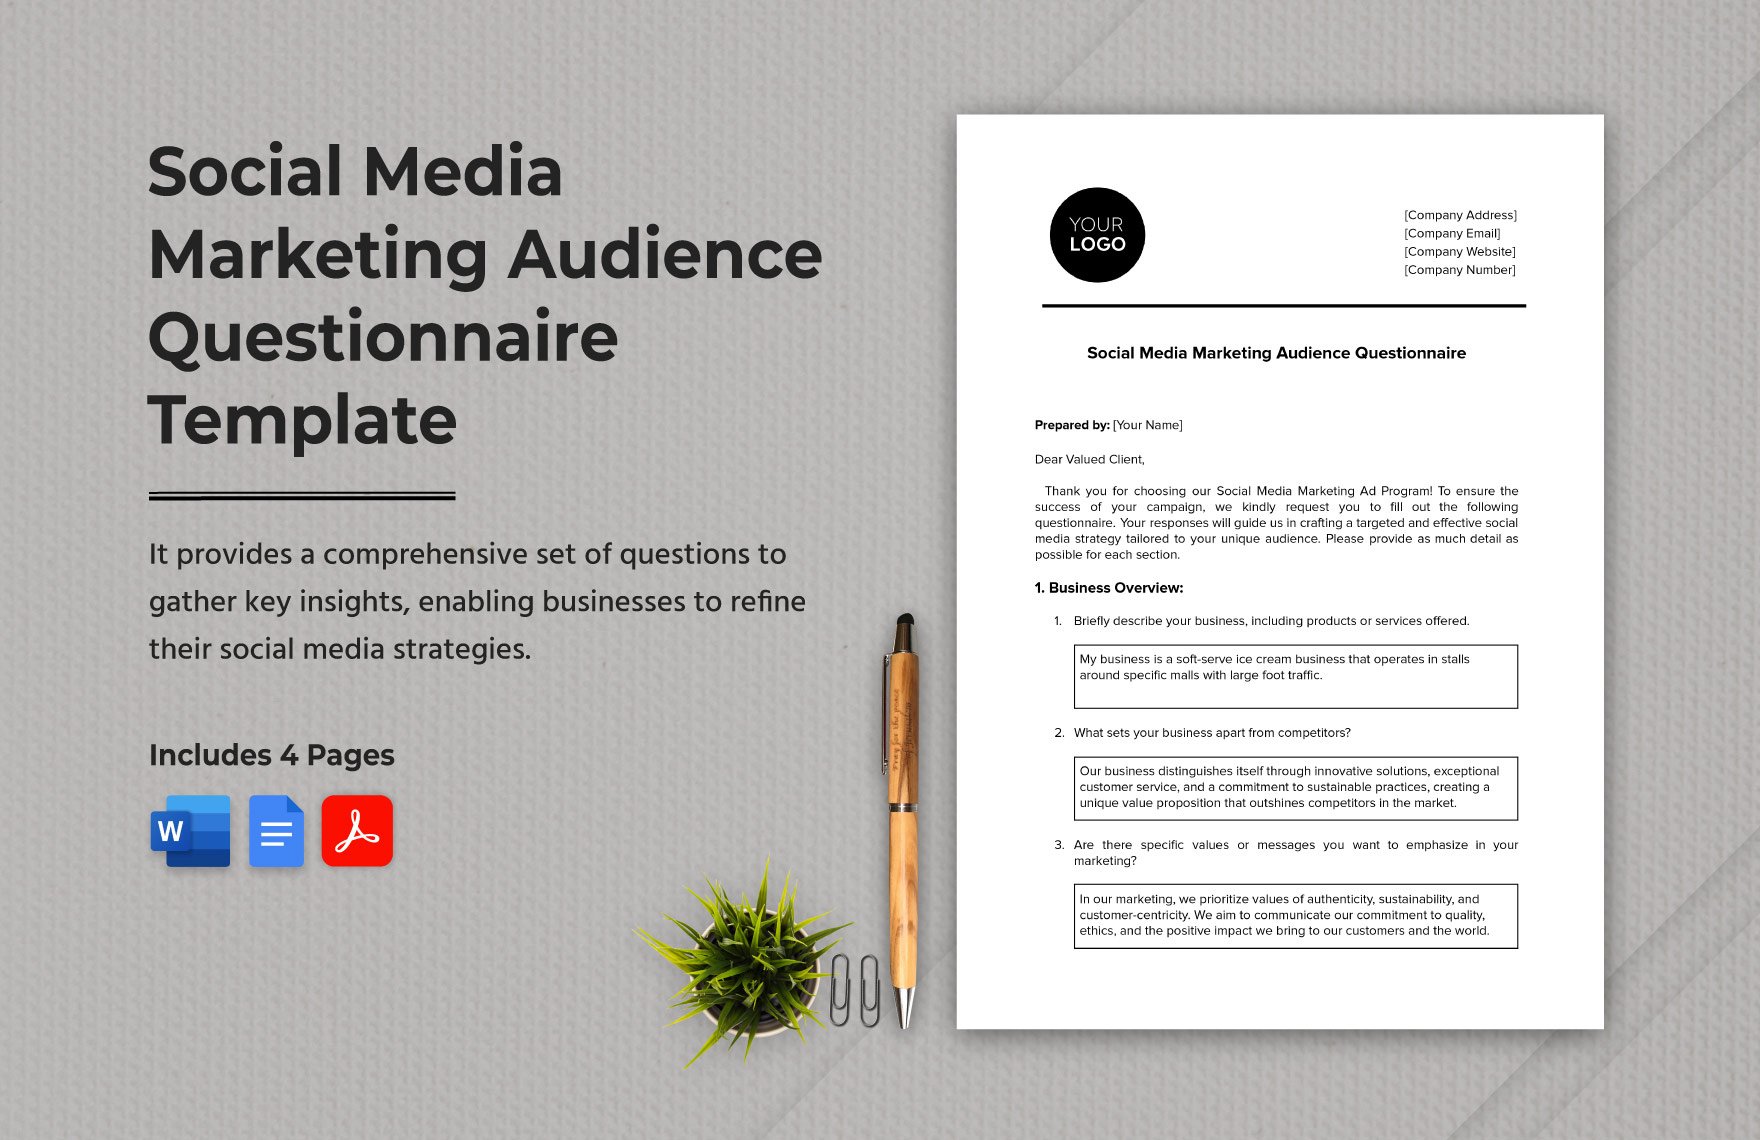 Social Media Marketing Audience Questionnaire Template in Word, Google Docs, PDF